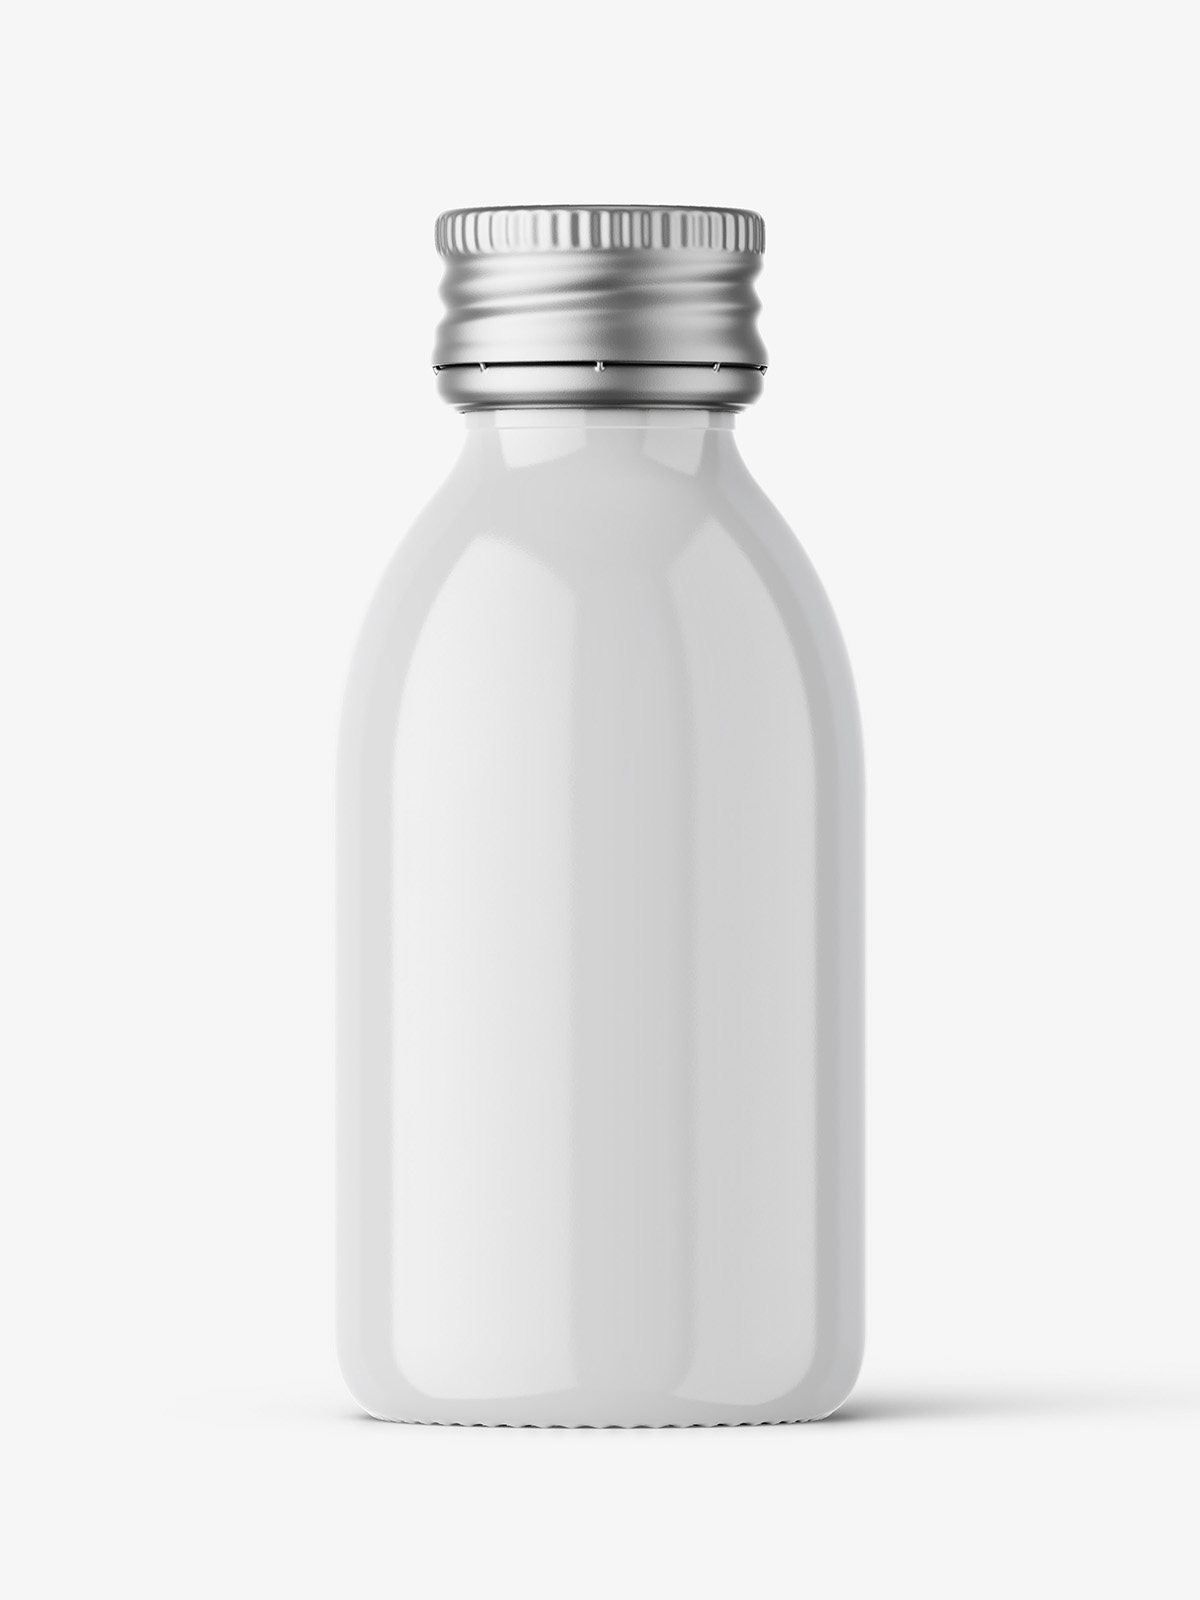 Download Syrup bottle mockup with silver cap / glossy - Smarty Mockups